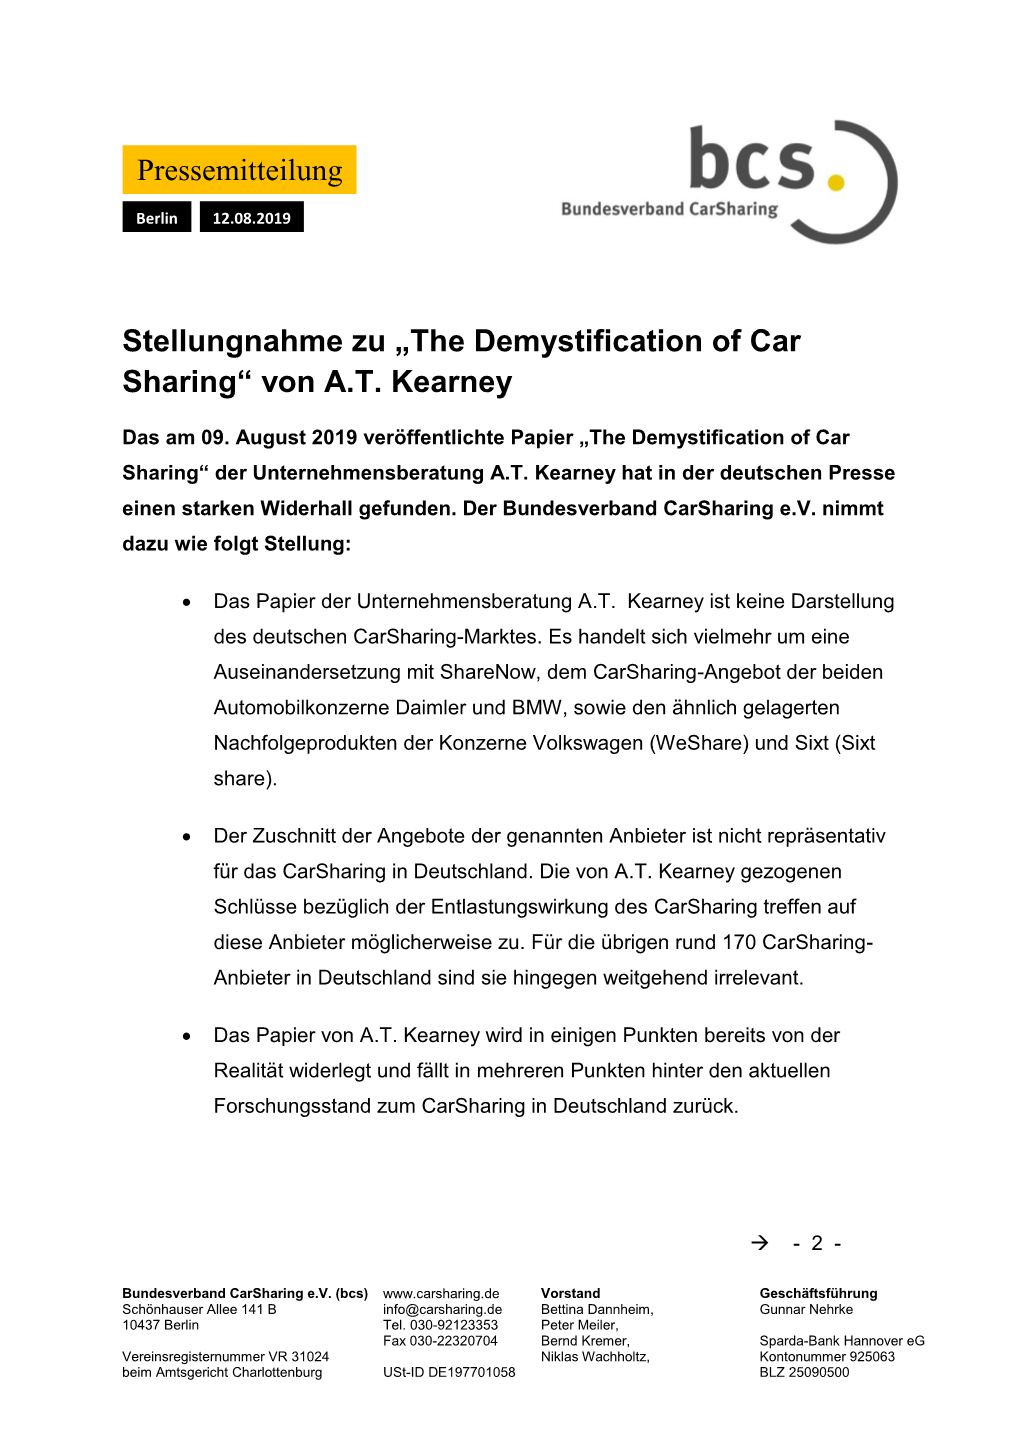 The Demystification of Car Sharing“ Von A.T